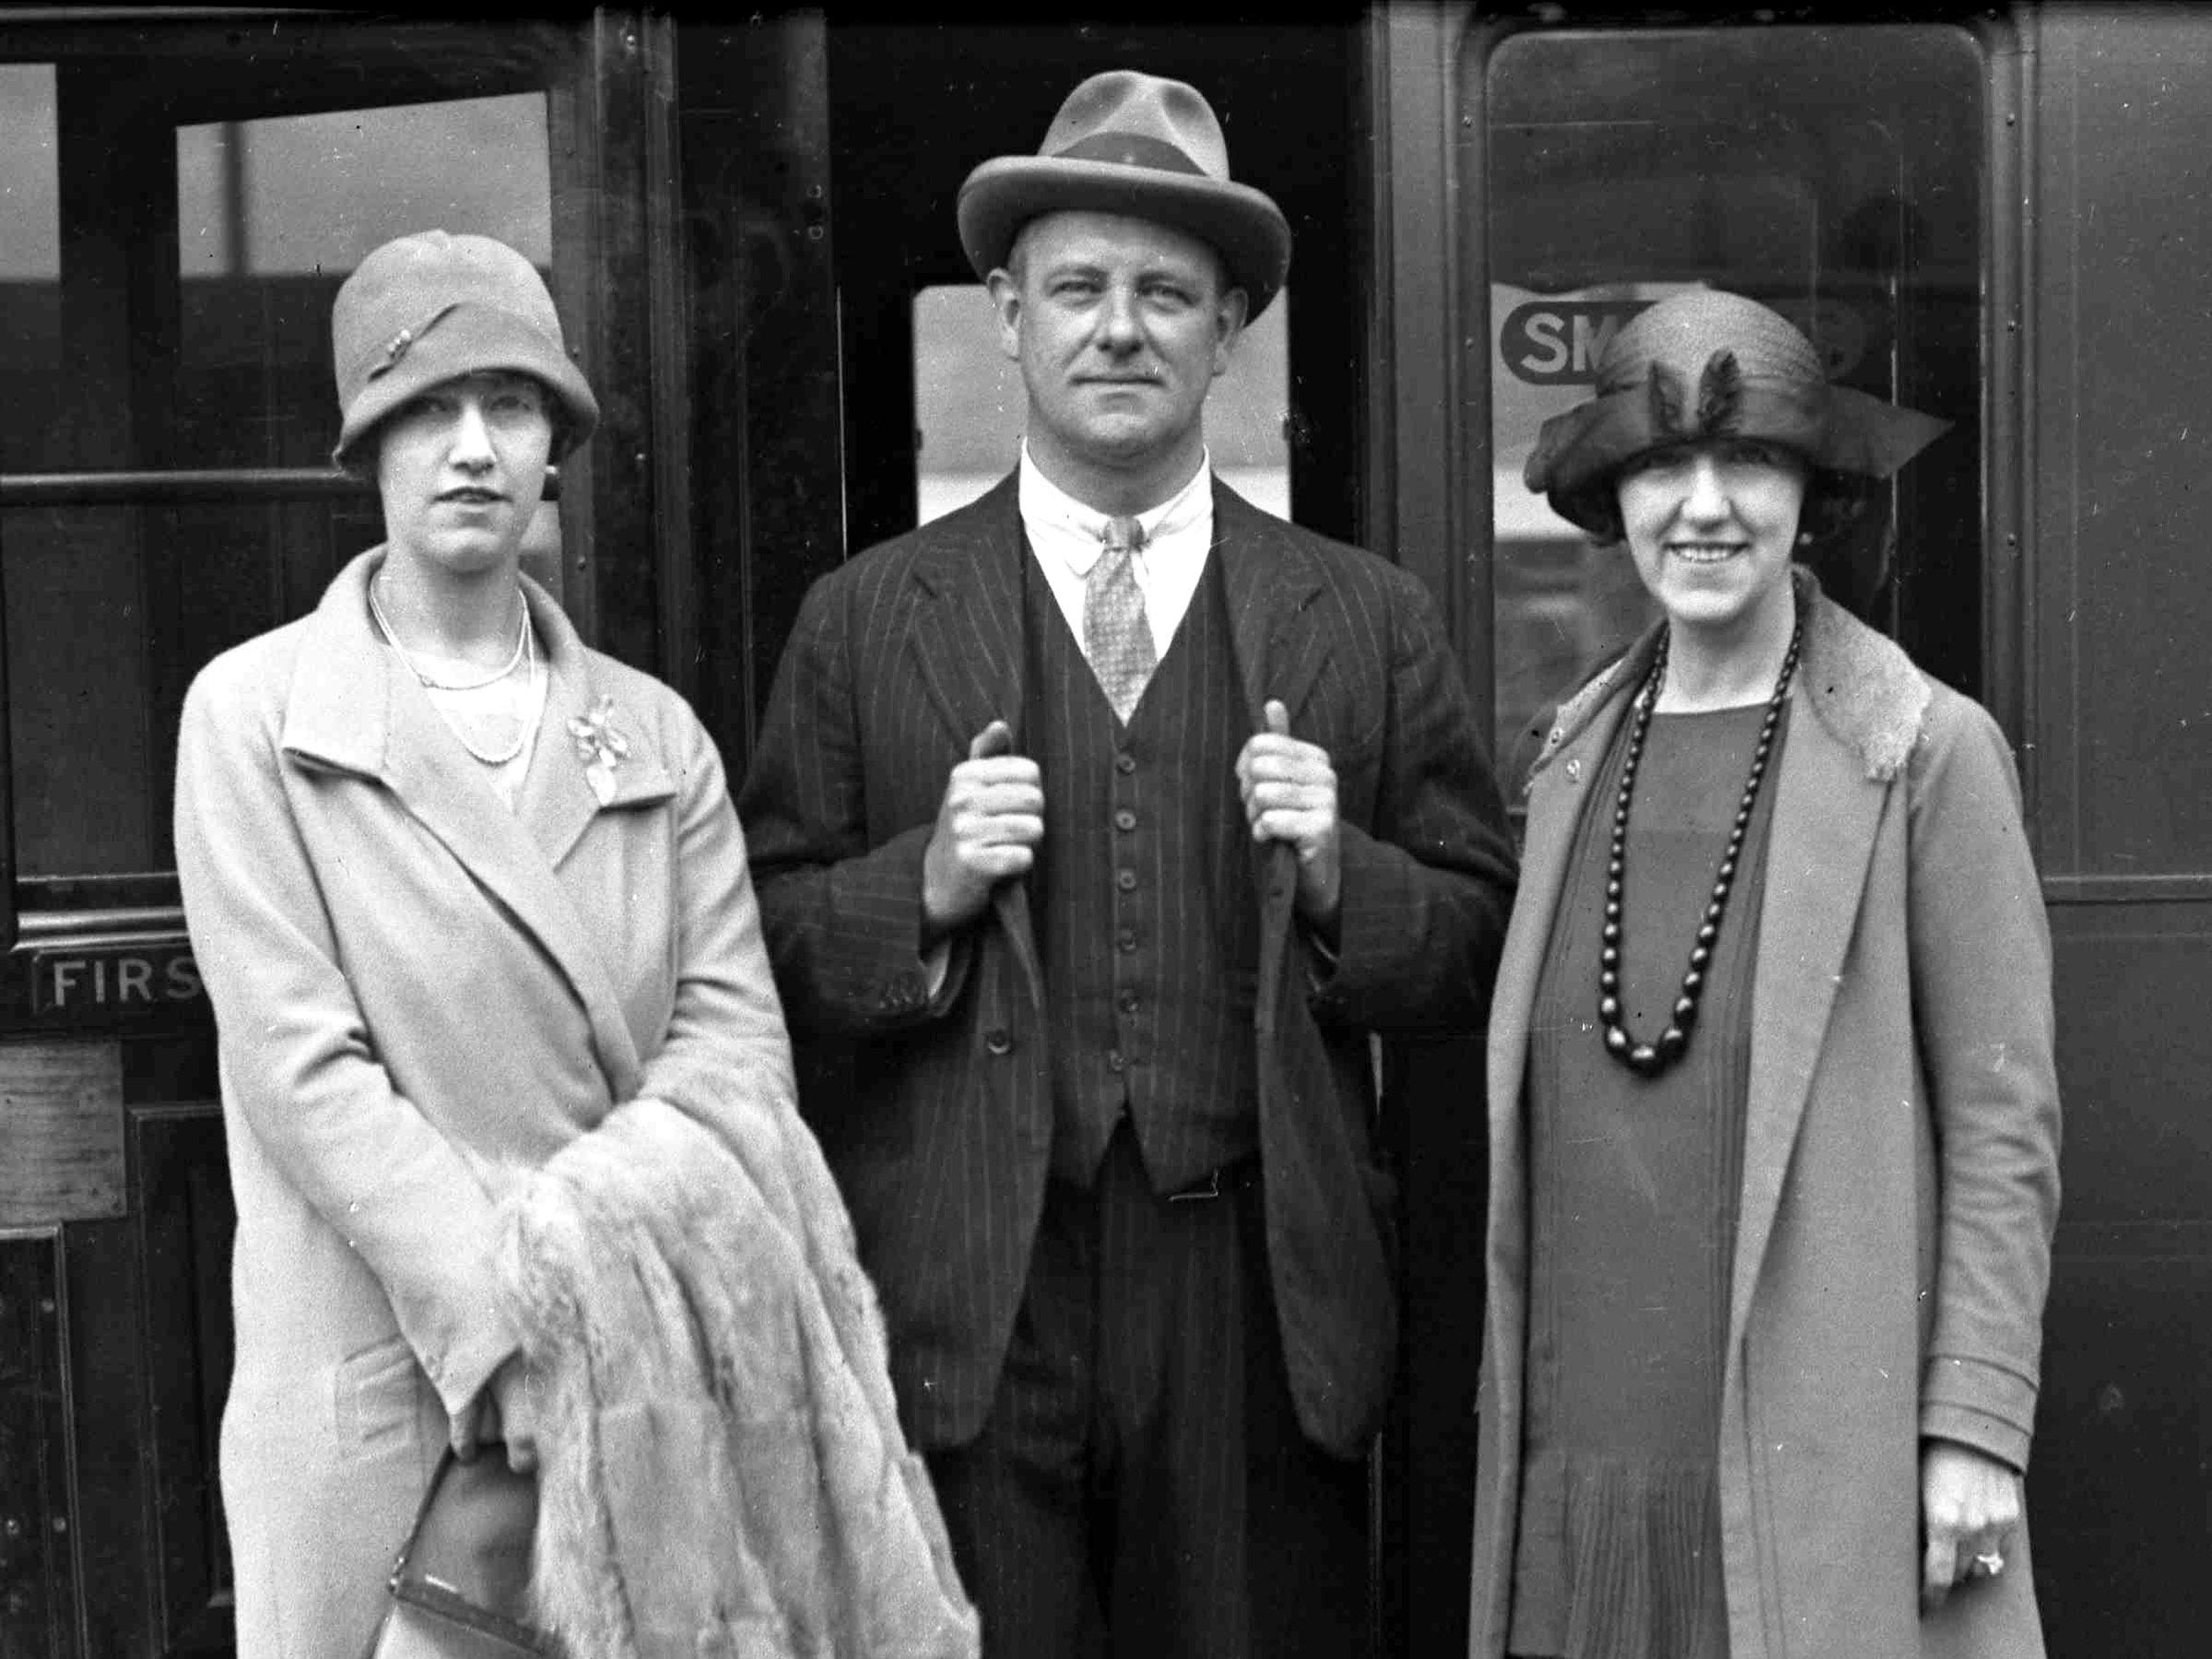 <p>British author P.G. Wodehouse was photographed leaving for a family vacation from Waterloo Station in London in 1929 wearing a three-piece pinstripe suit.</p>